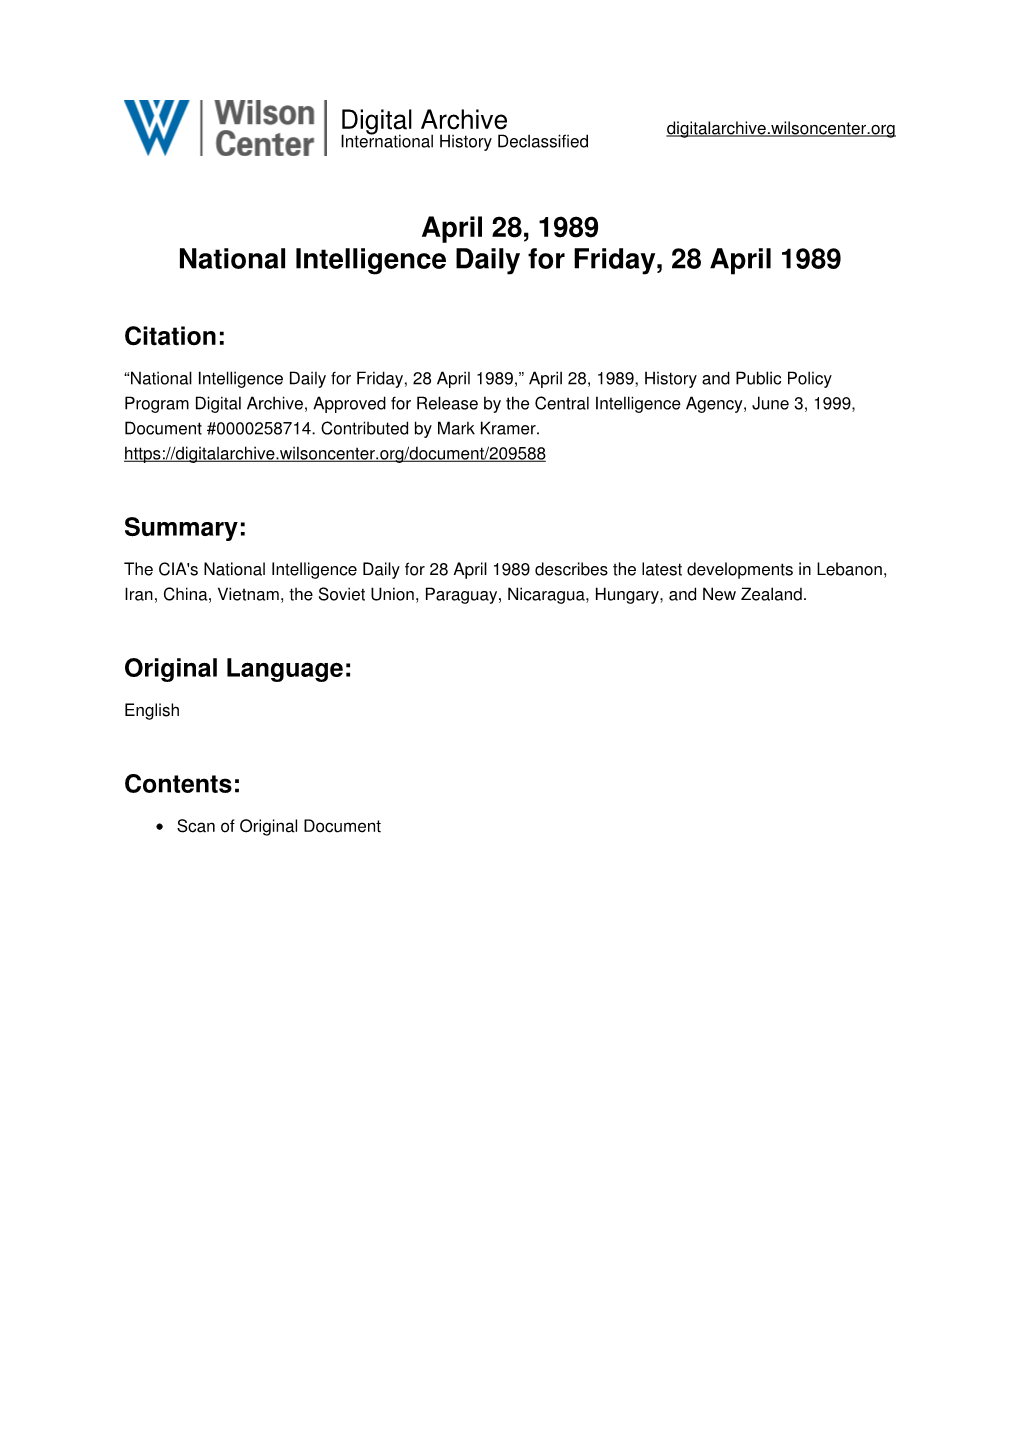 April 28, 1989 National Intelligence Daily for Friday, 28 April 1989